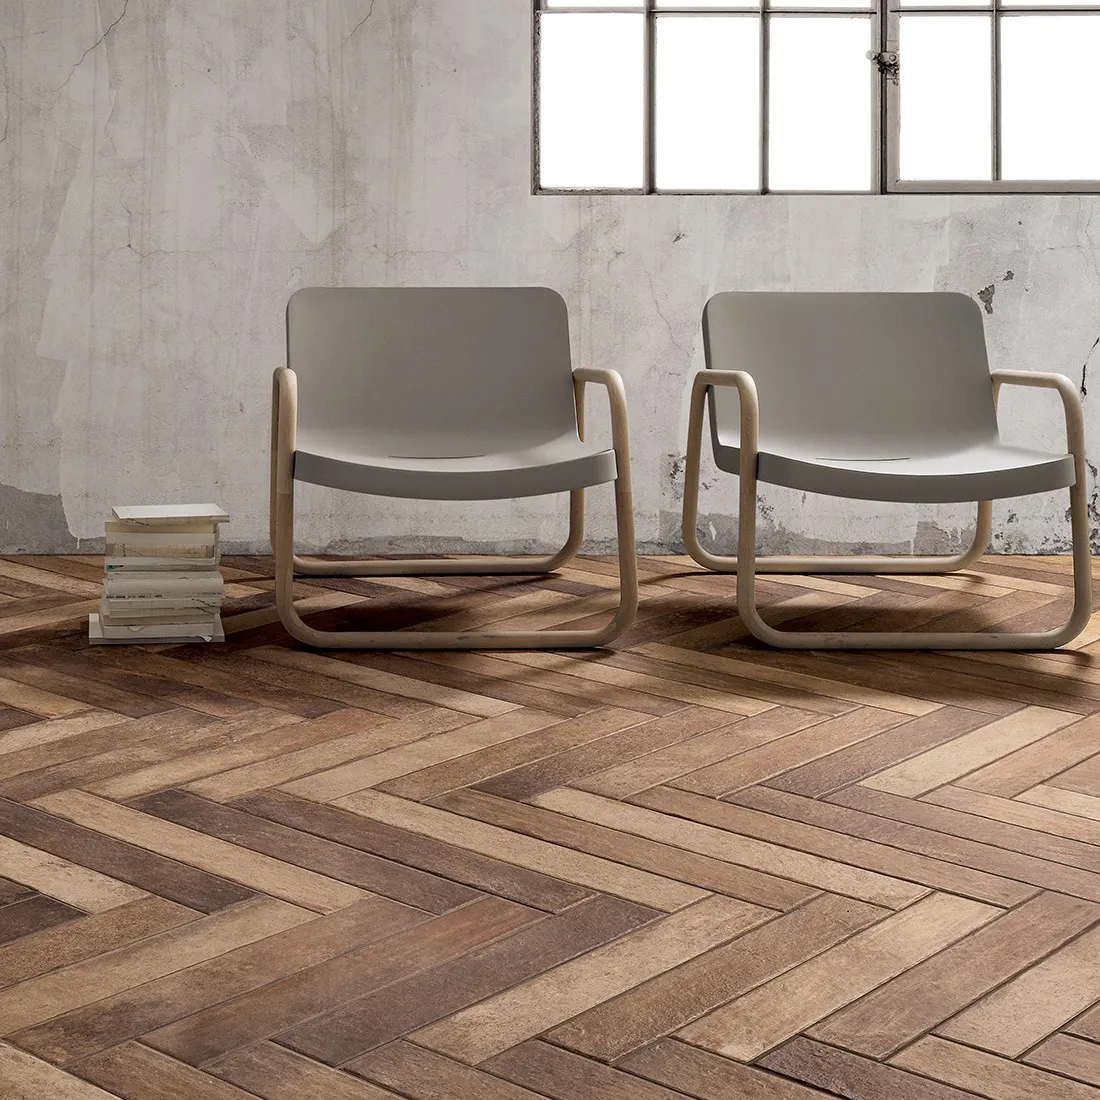 Herringbone timber flooring with 2 occasional chairs